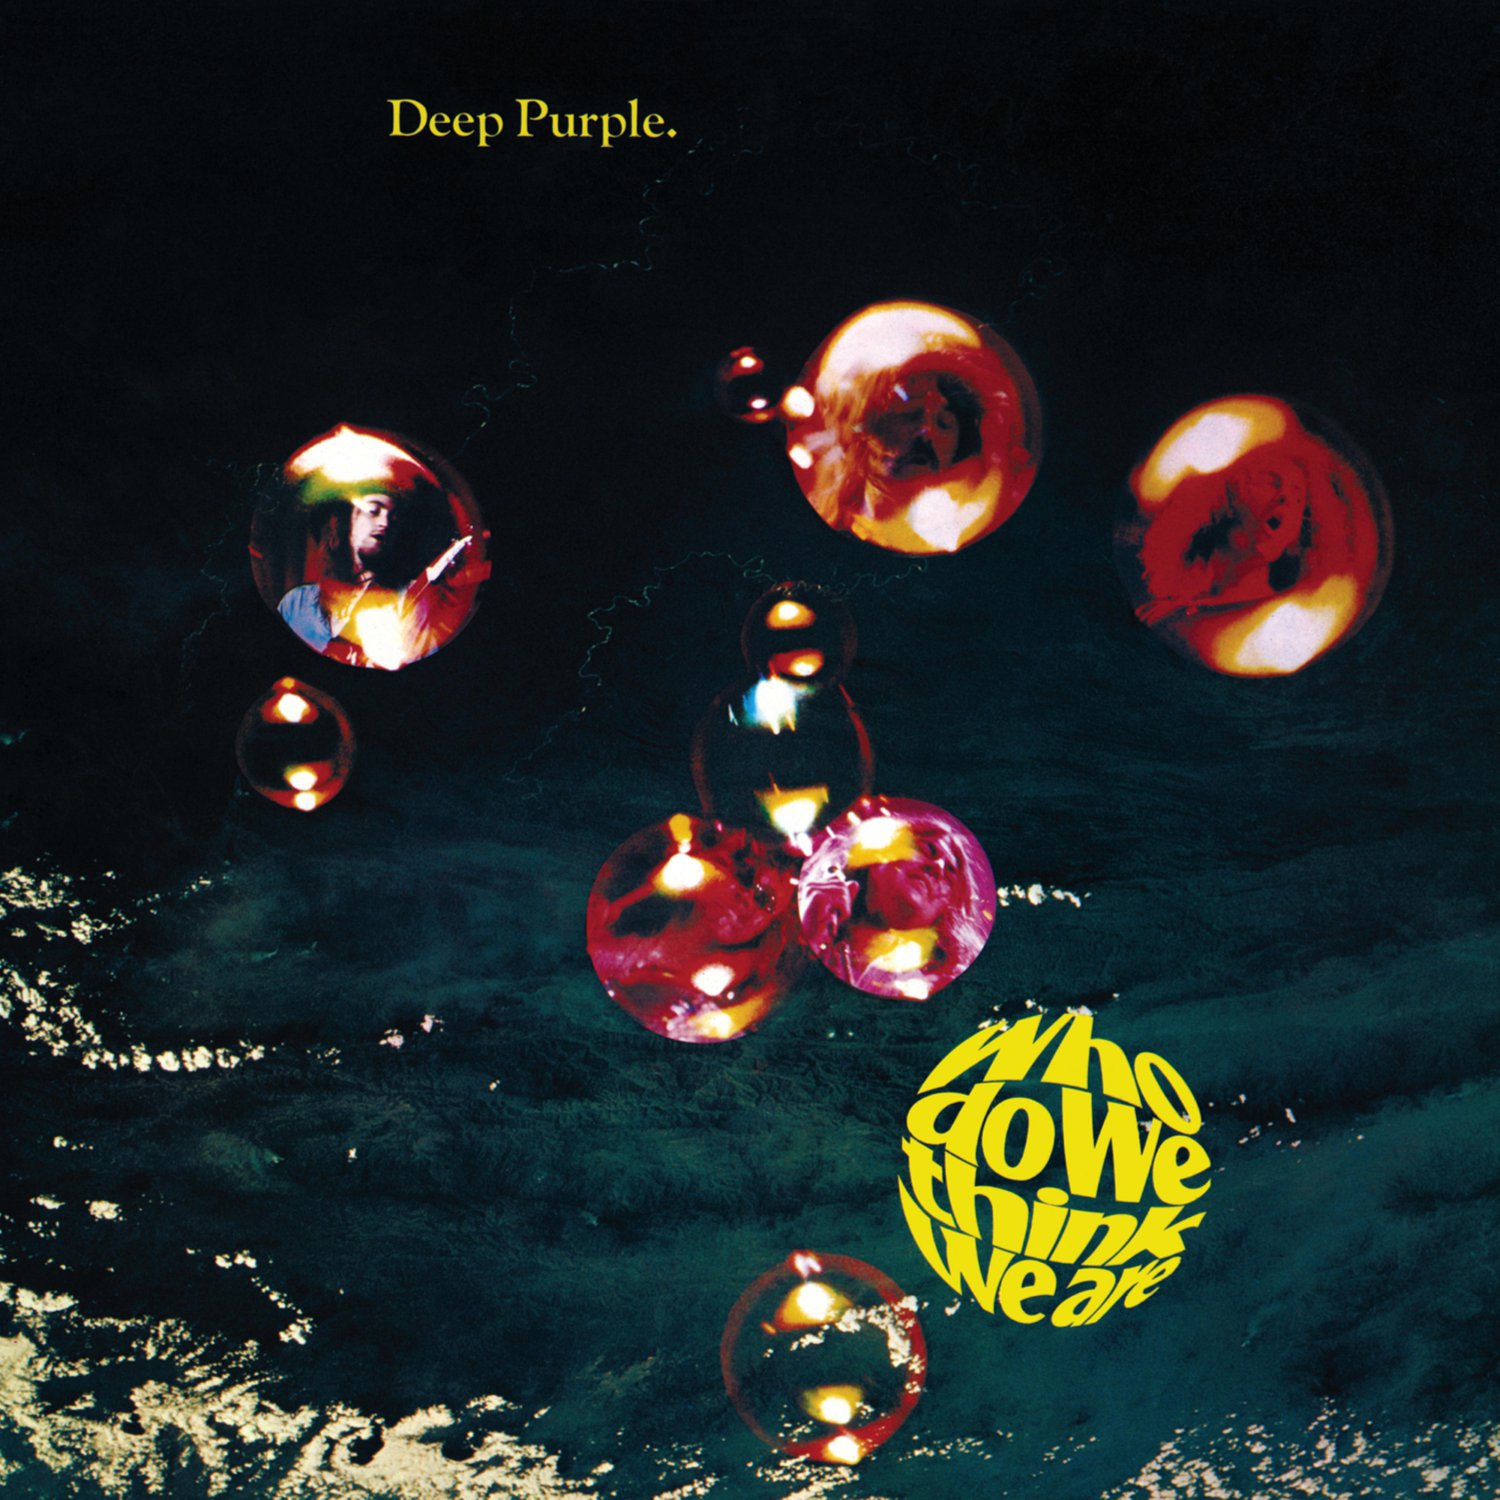 DEEP PURPLE Who Do We Think We Are BANNER Huge 4X4 Ft Fabric Poster Tapestry Flag album cover art